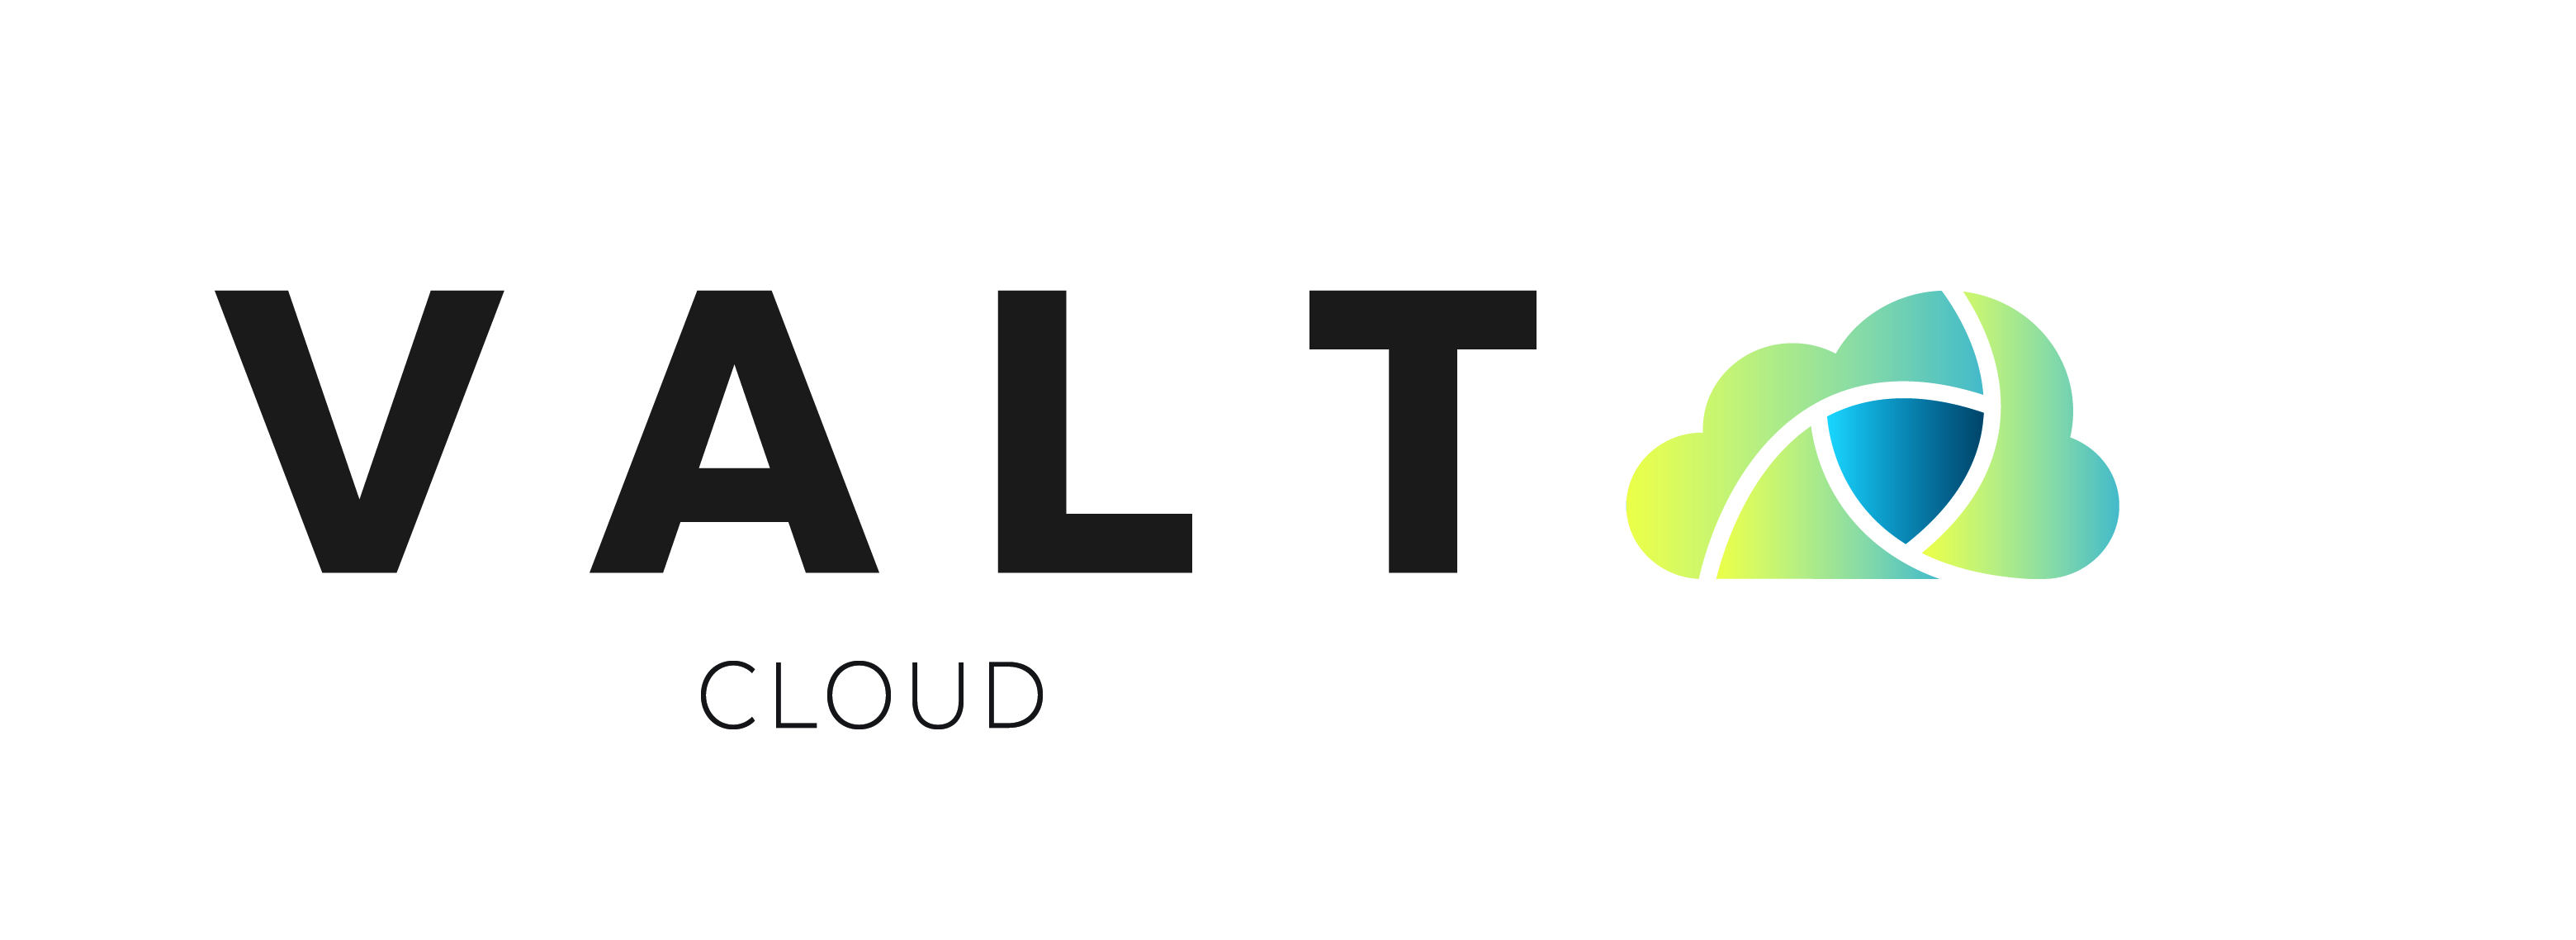 Introducing VALT Cloud: Observe Anywhere, Anytime